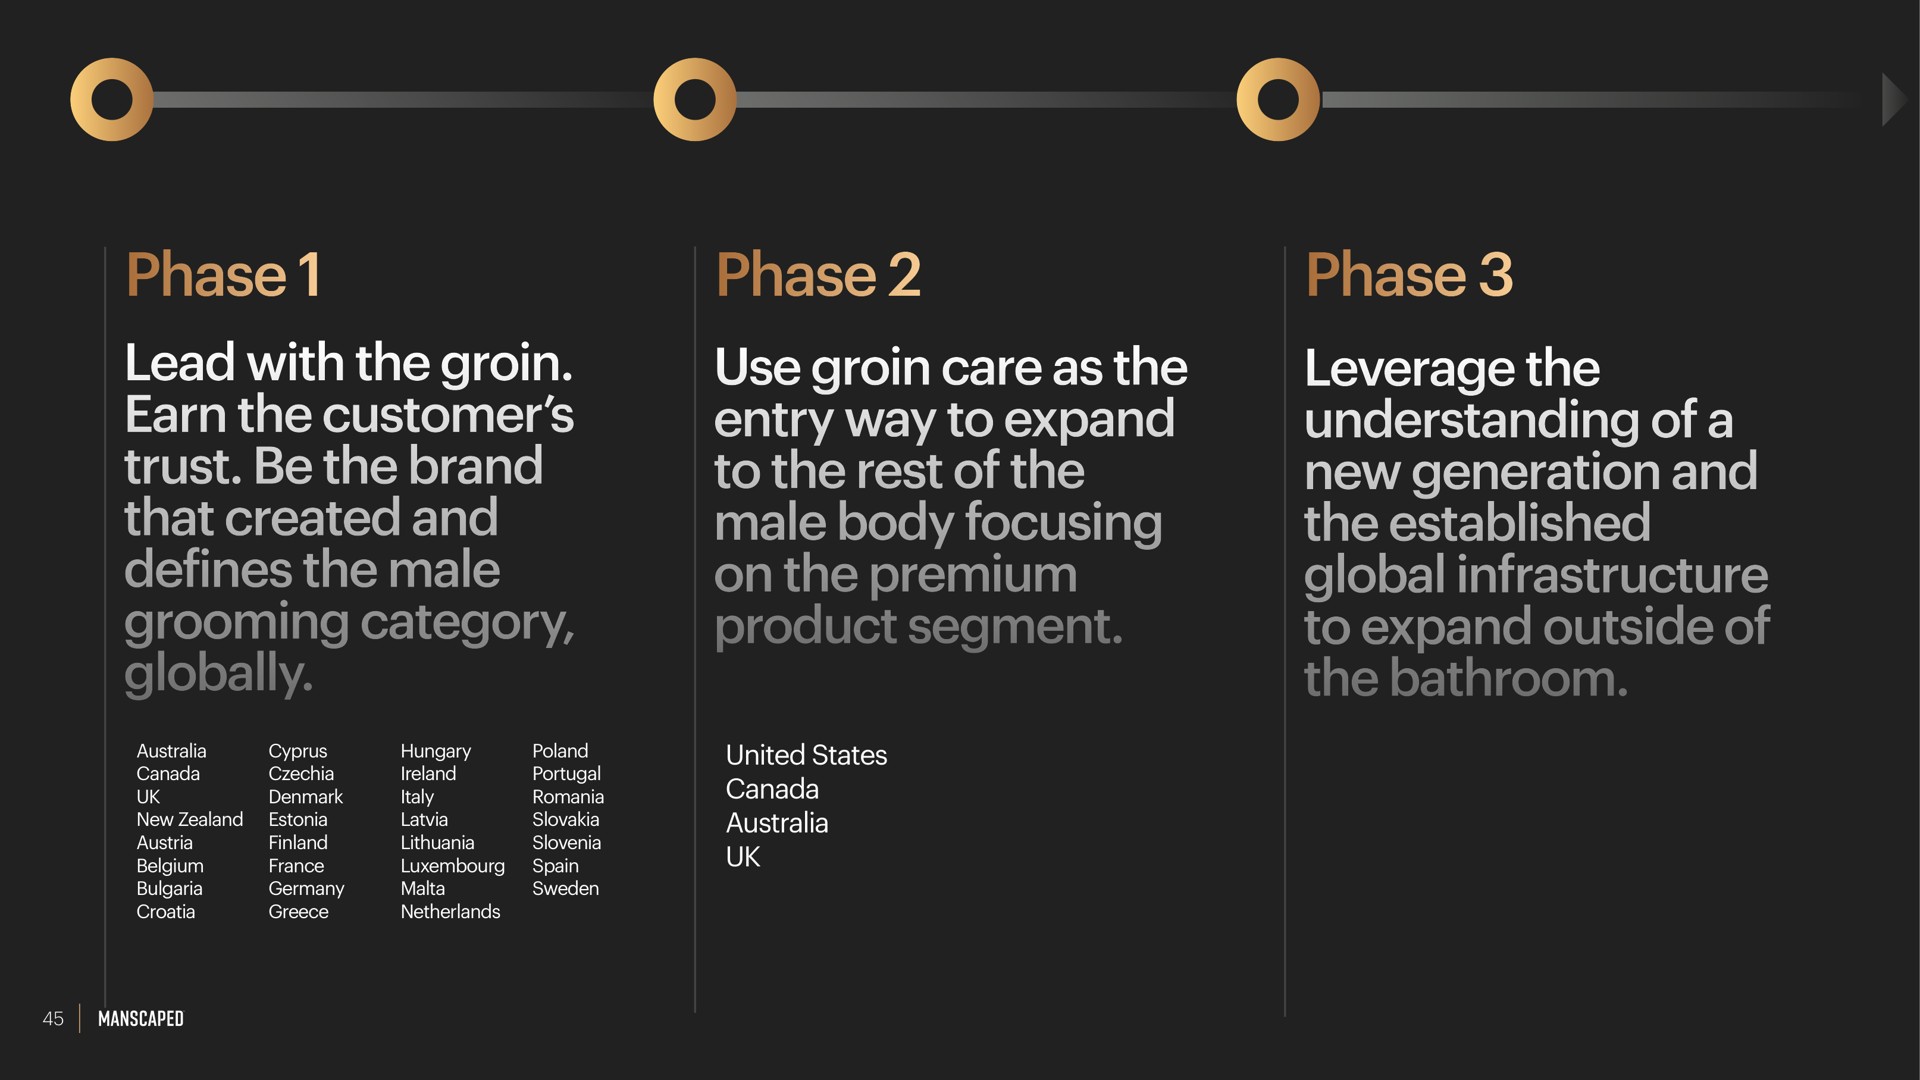 phase phase phase lead with the groin earn the customer trust be the brand that created and defines the male grooming category globally use groin care as the entry way to expand to the rest of the male body focusing on the premium product segment leverage the understanding of a new generation and the established global infrastructure to expand outside of the bathroom date | Manscaped